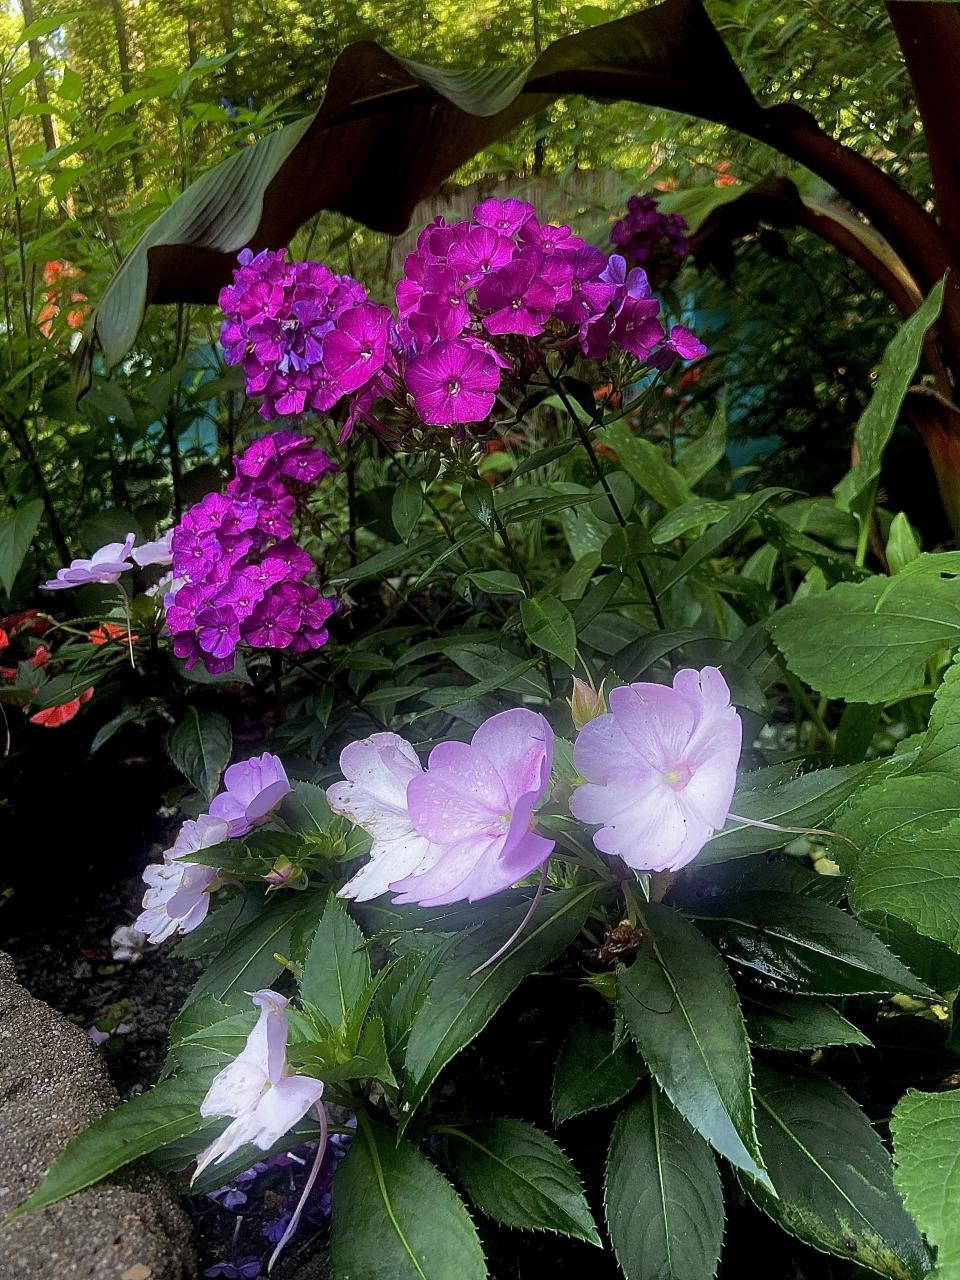 Luminary Ultra Violet is partnered here with SunPatiens Compact Orchid Blush.